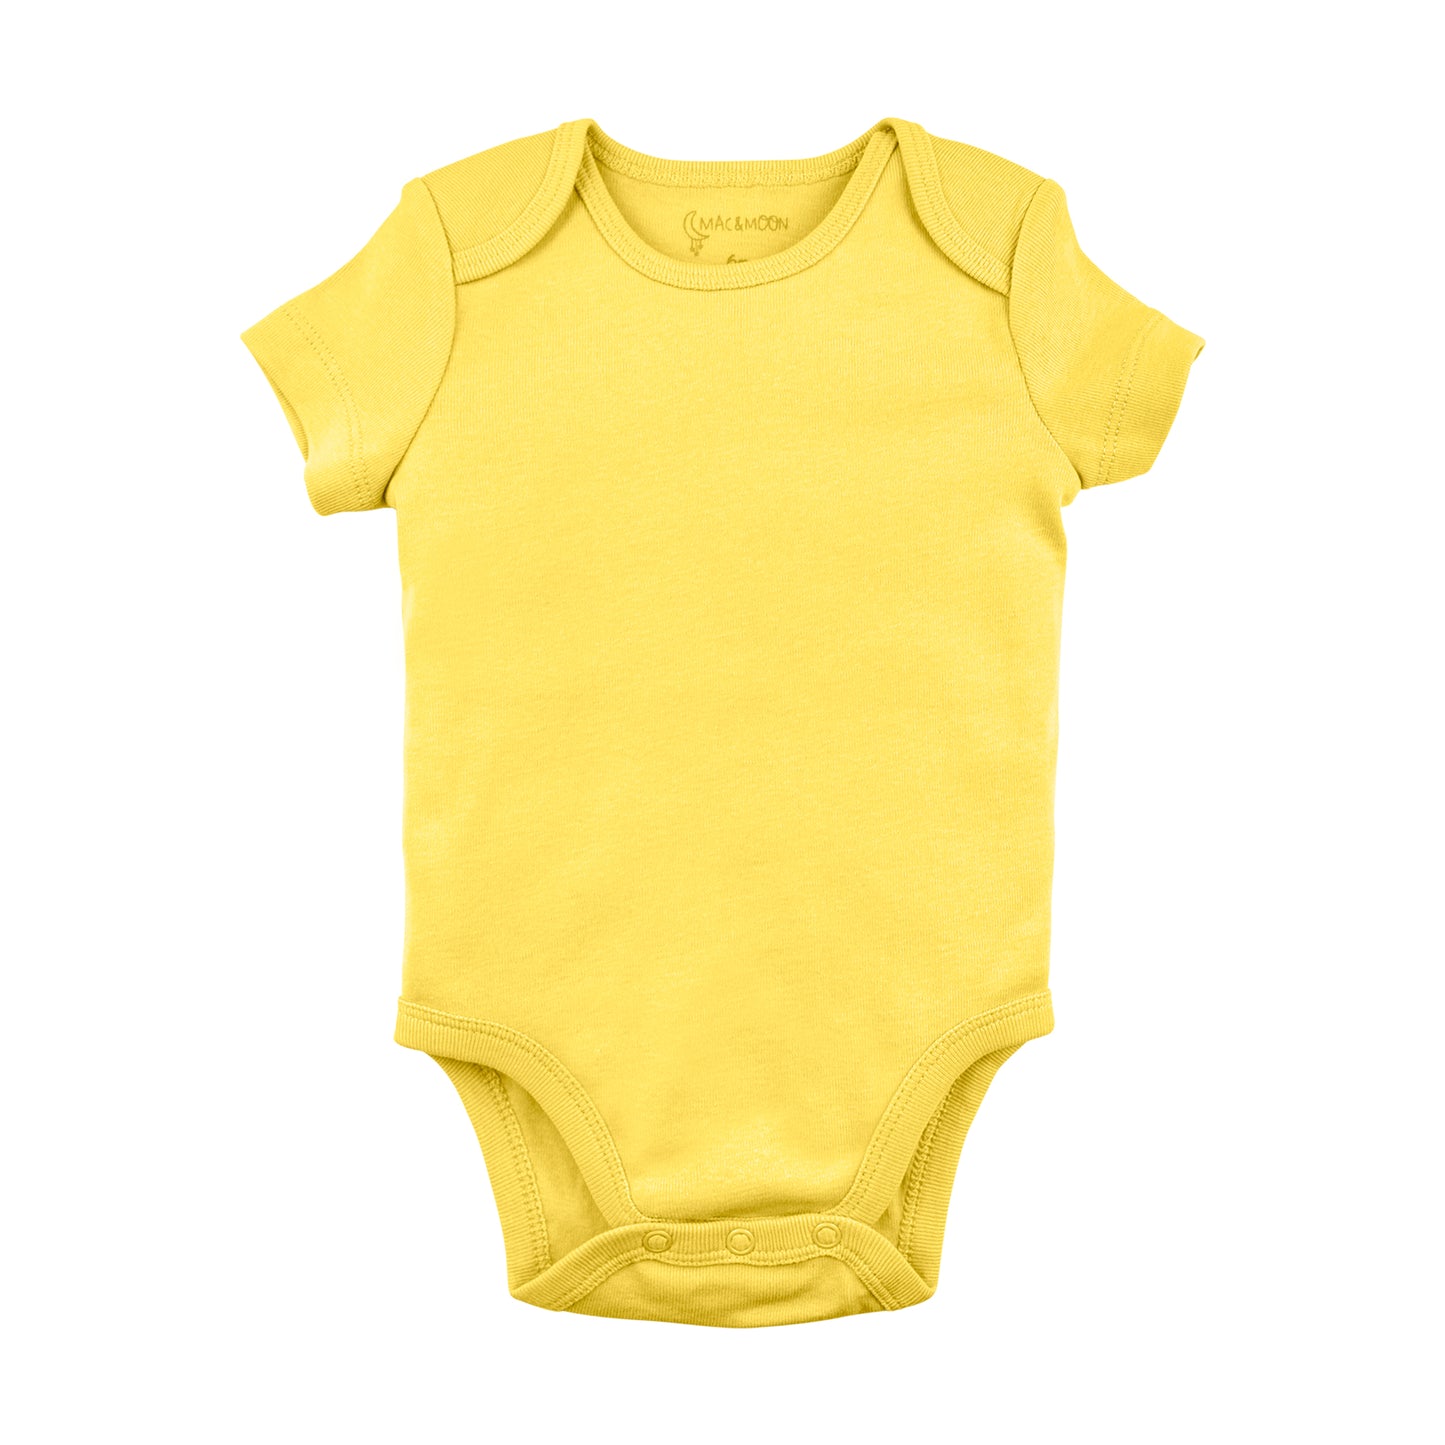 5-Pack Short Sleeve Bodysuit in Blue, Yellow and Gray